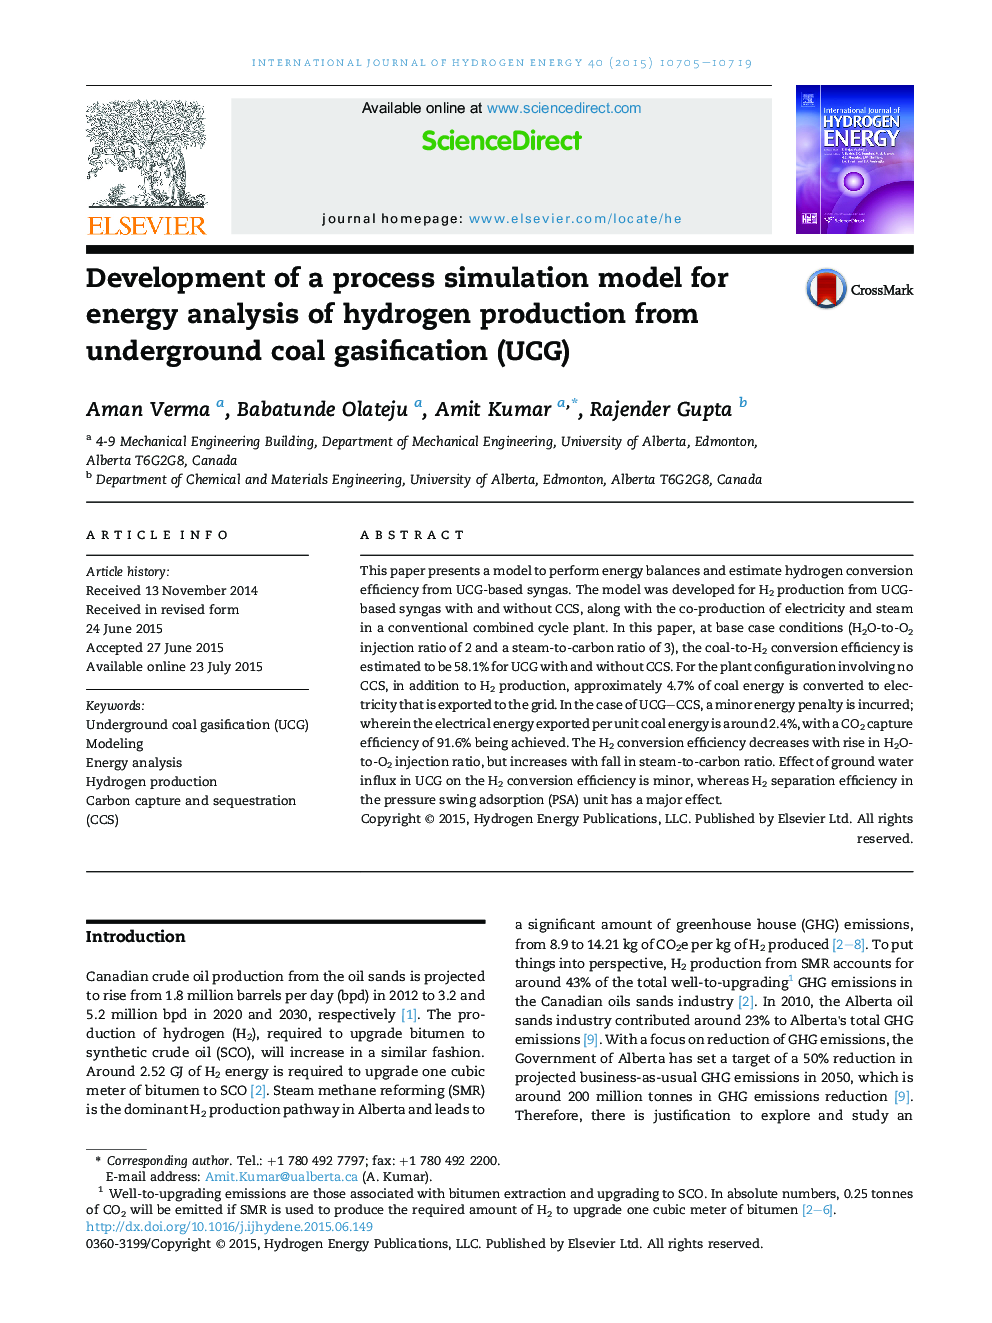 Development of a process simulation model for energy analysis of hydrogen production from underground coal gasification (UCG)